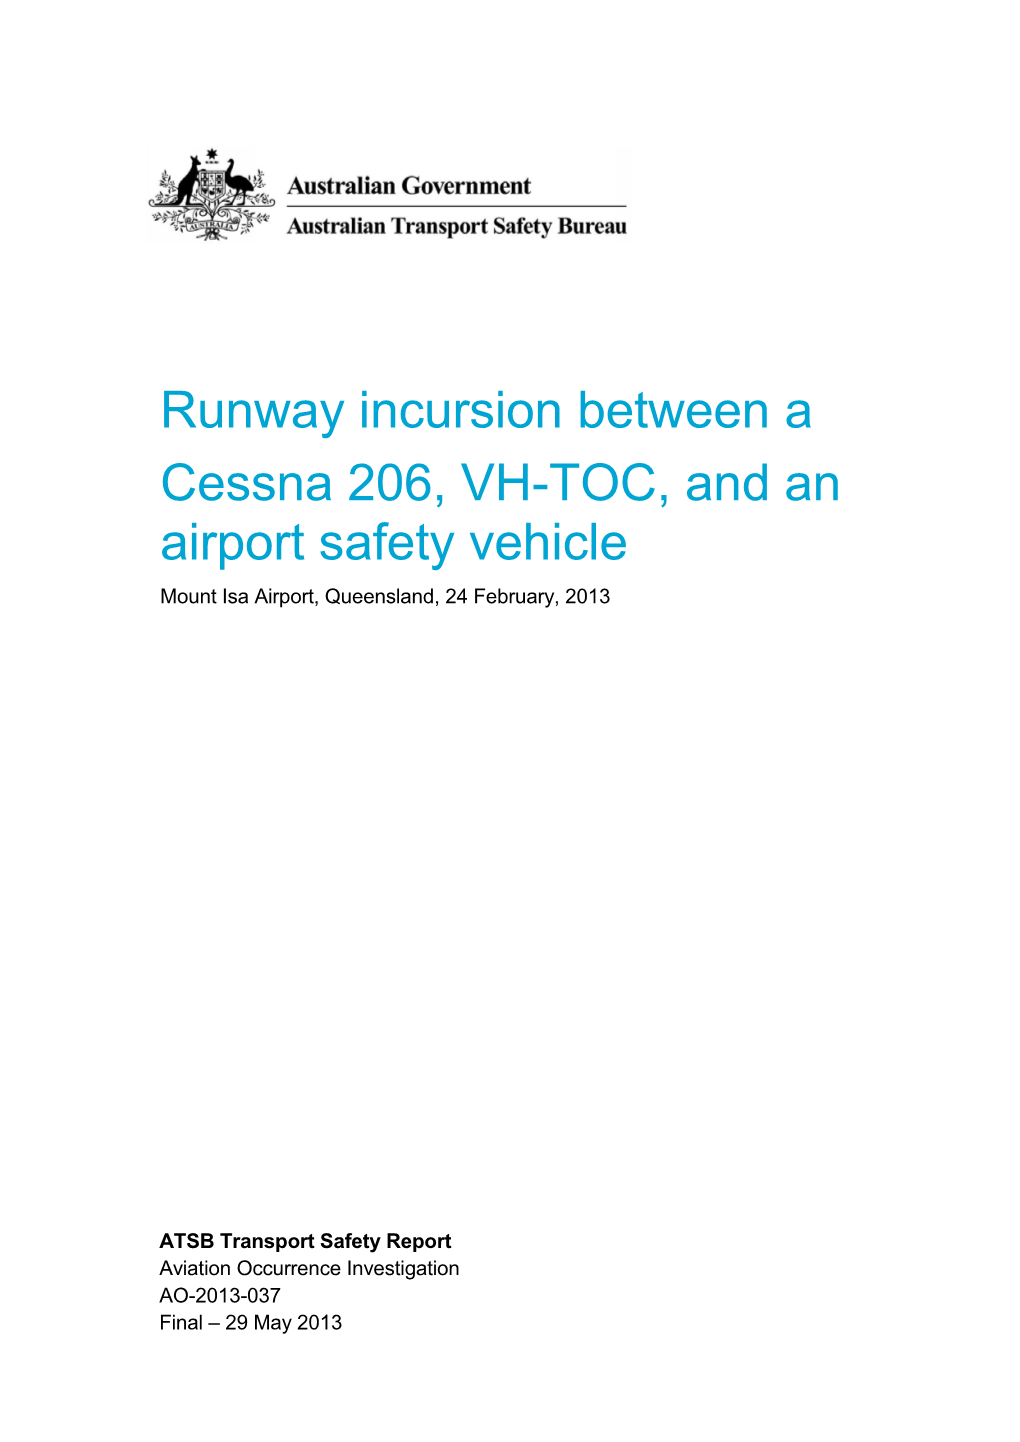 Runway Incursion Between a Cessna 206, VH-TOC, and an Airport Safety Vehicle